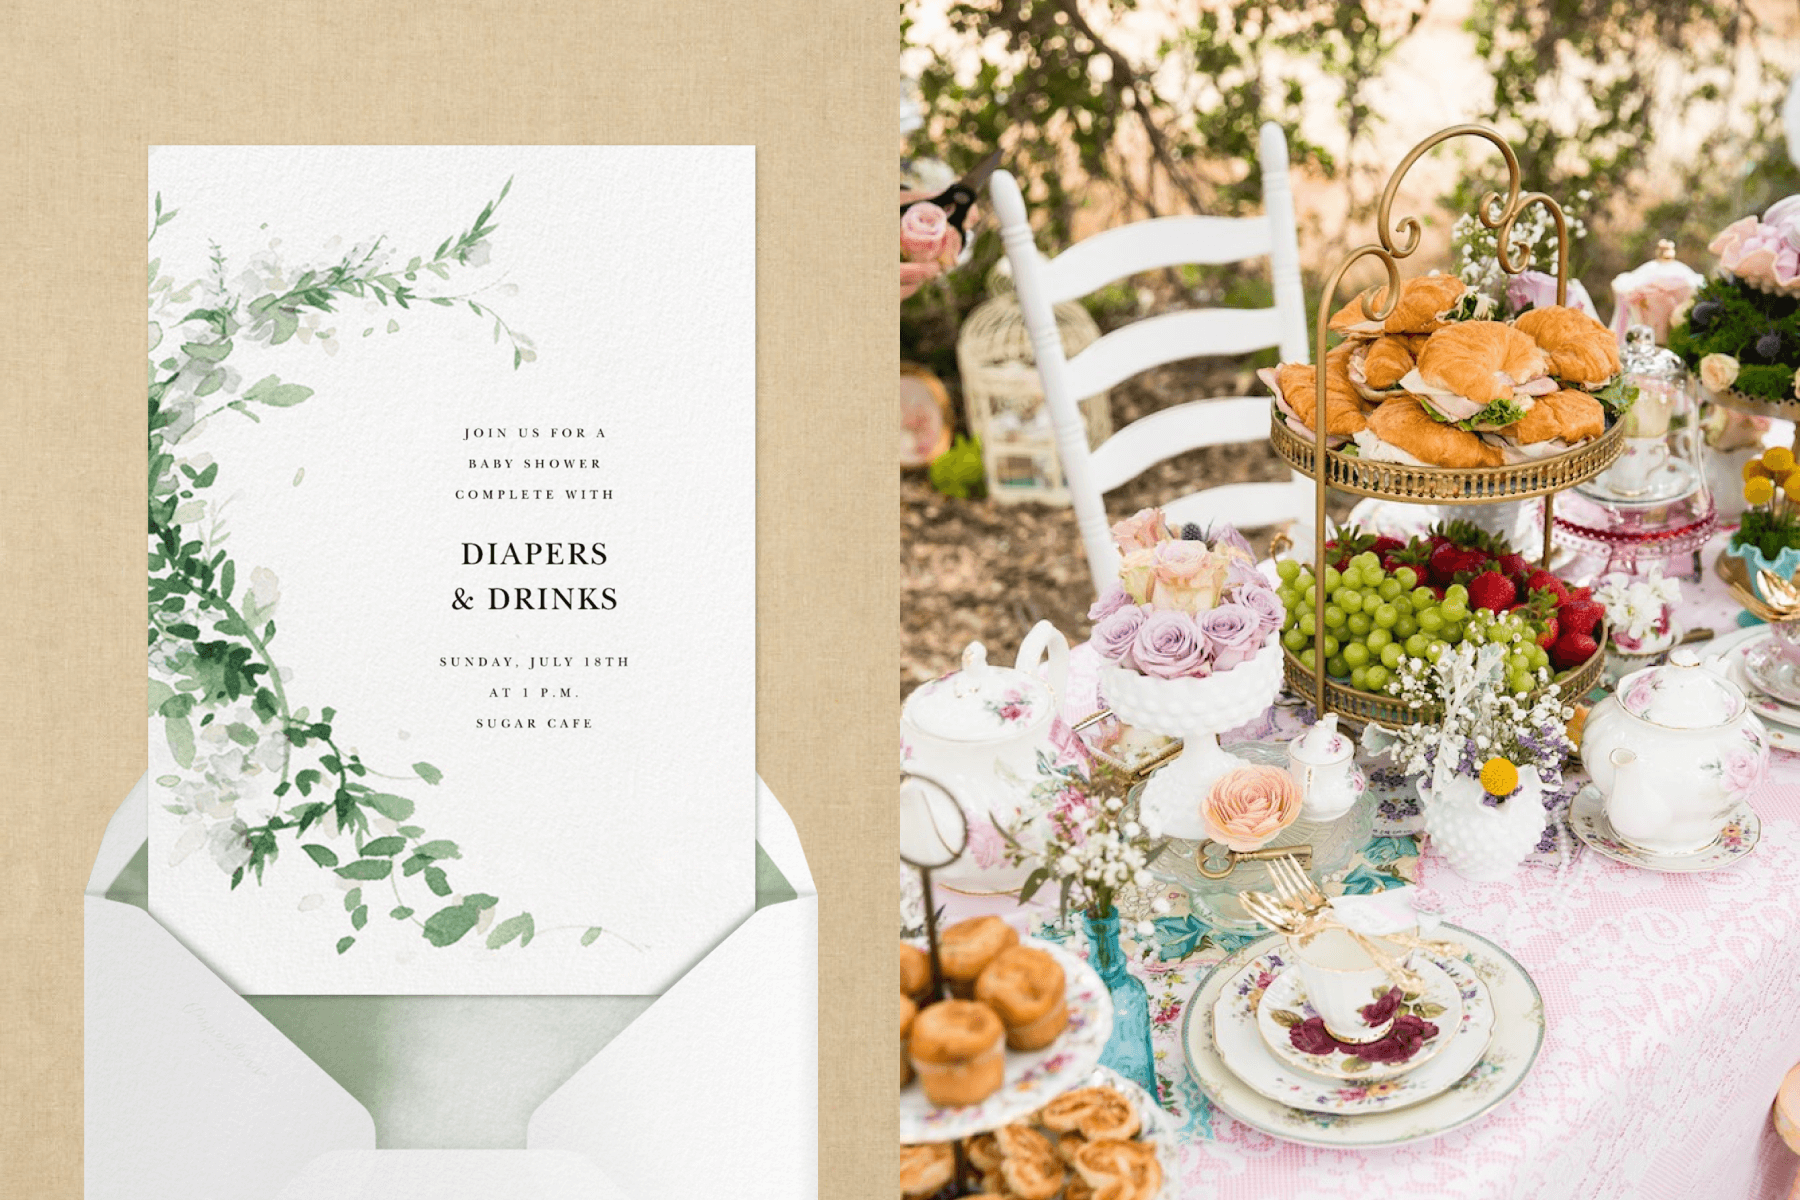 Left: invitation with delicate green branches and leaves. Right: garden party table with abundant finger food and florals